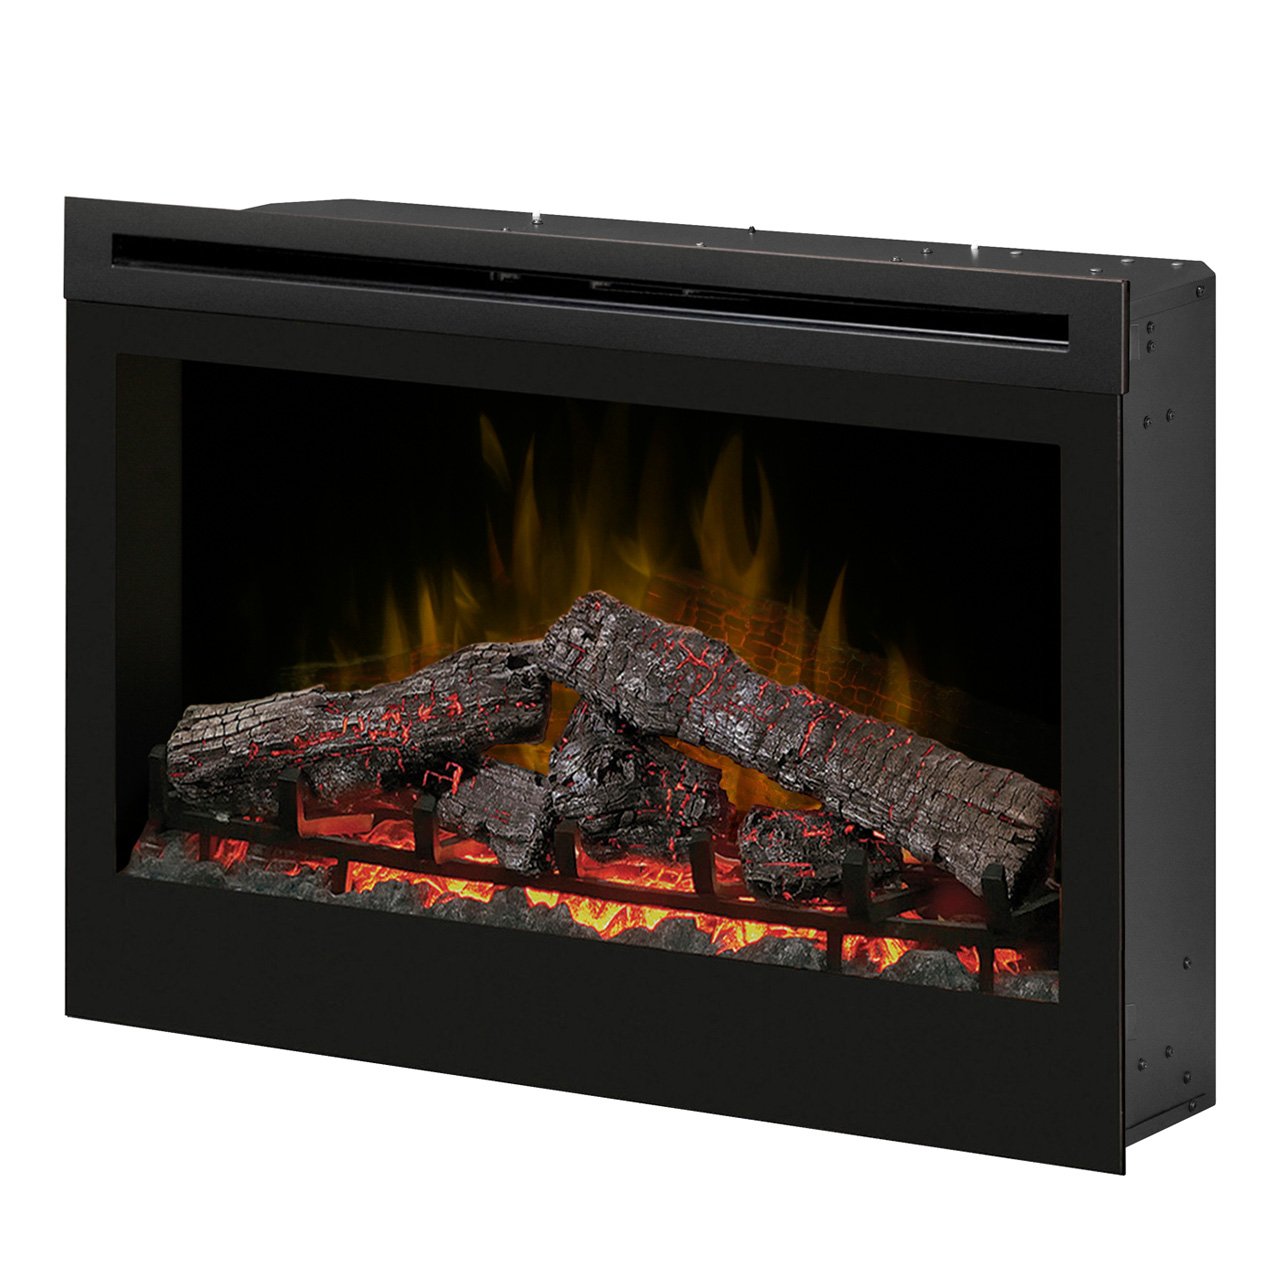 Gas Heater Fireplace Beautiful Dimplex Df3033st 33 Inch Self Trimming Electric Fireplace Insert